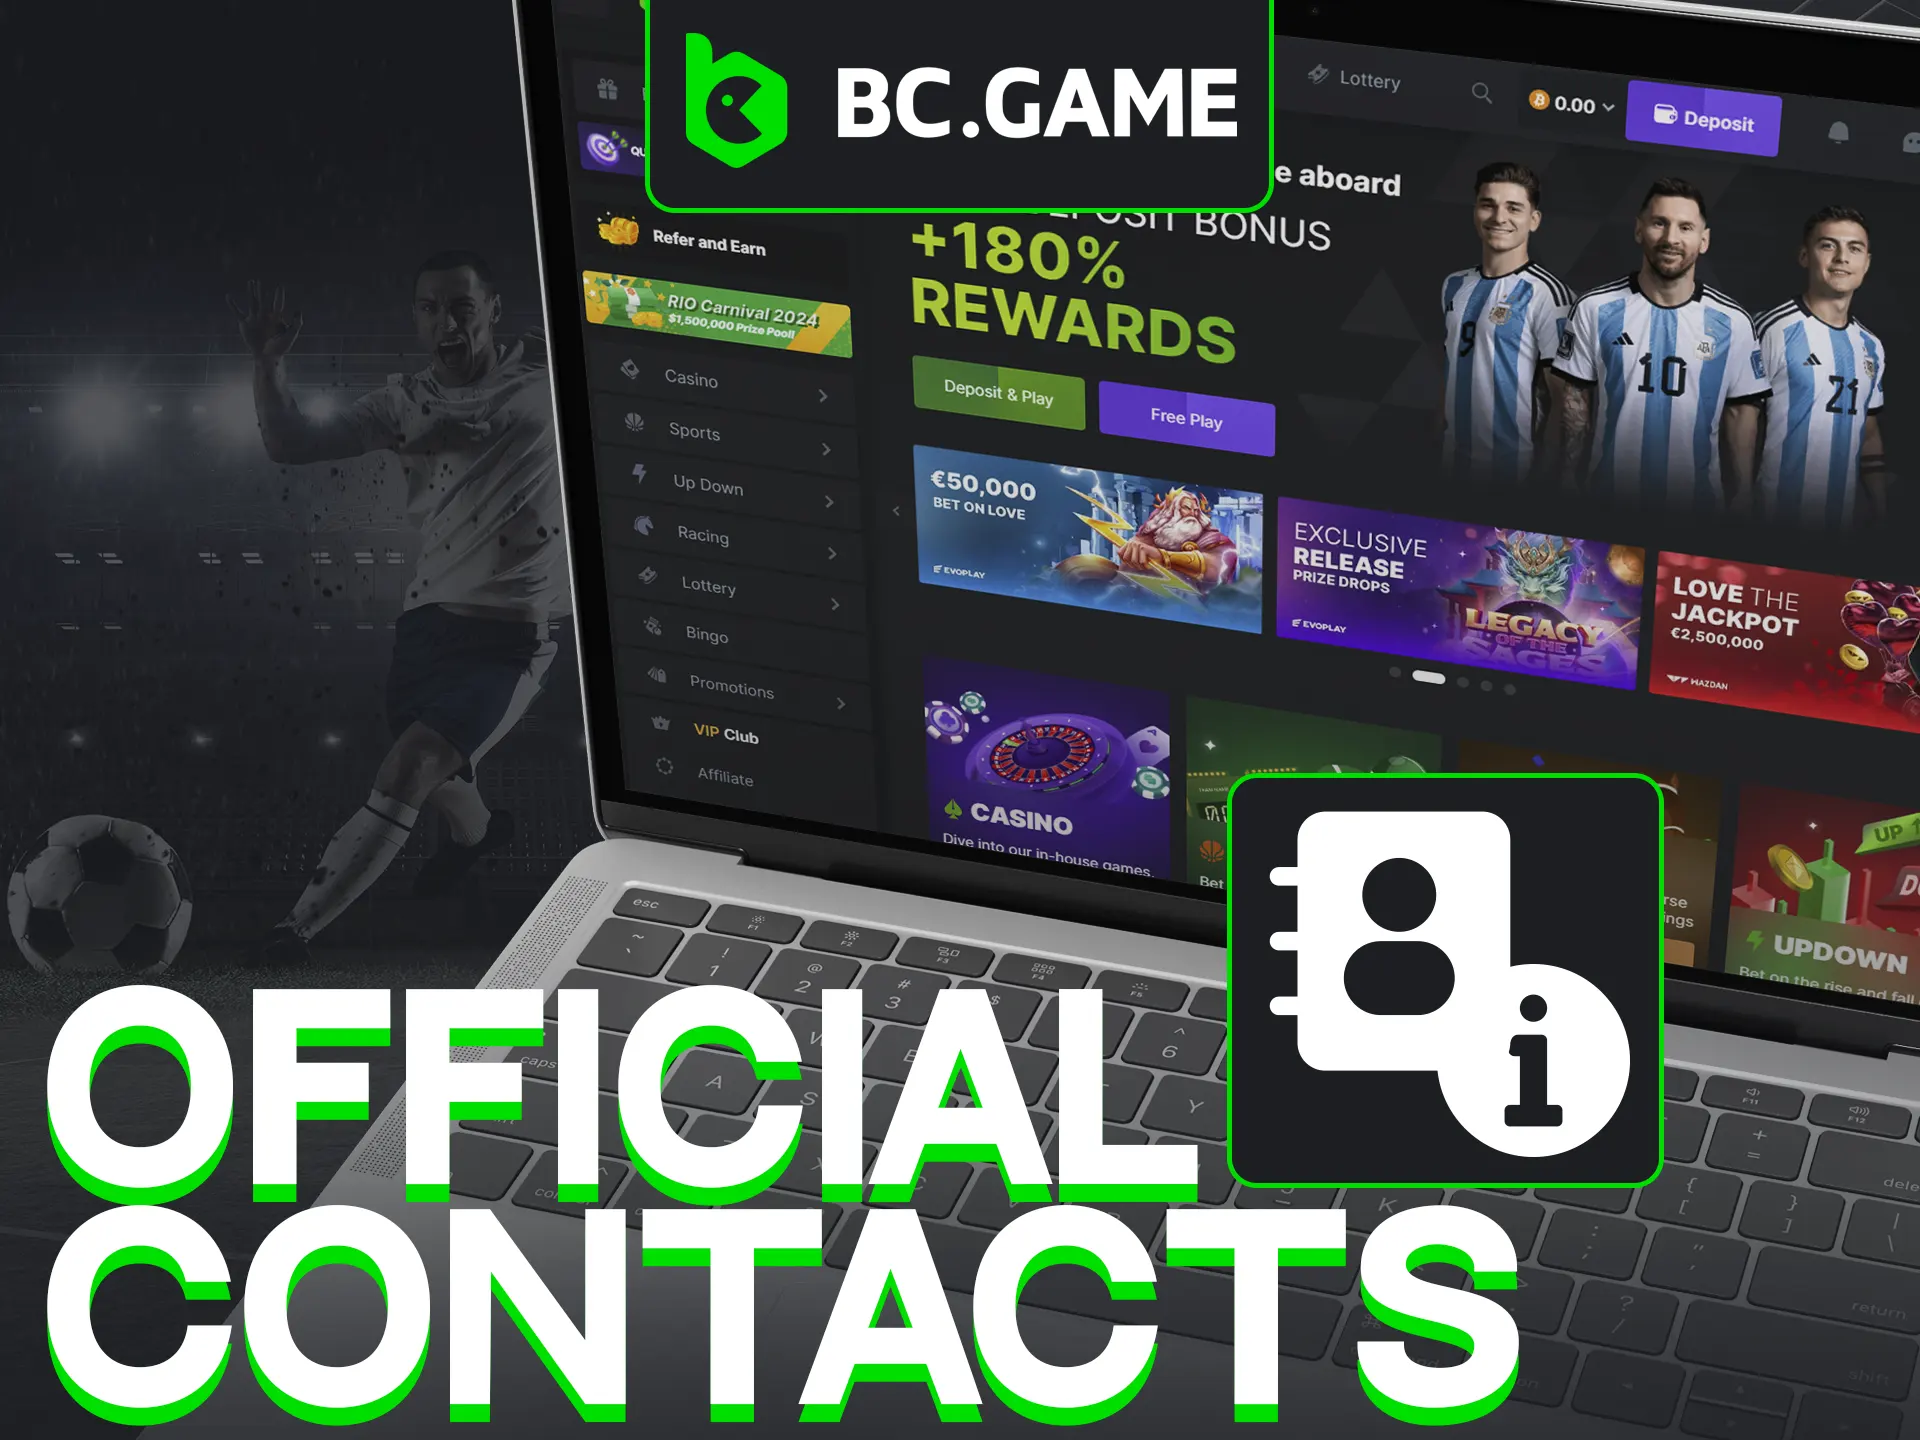 Contact BC Game through various channels provided.